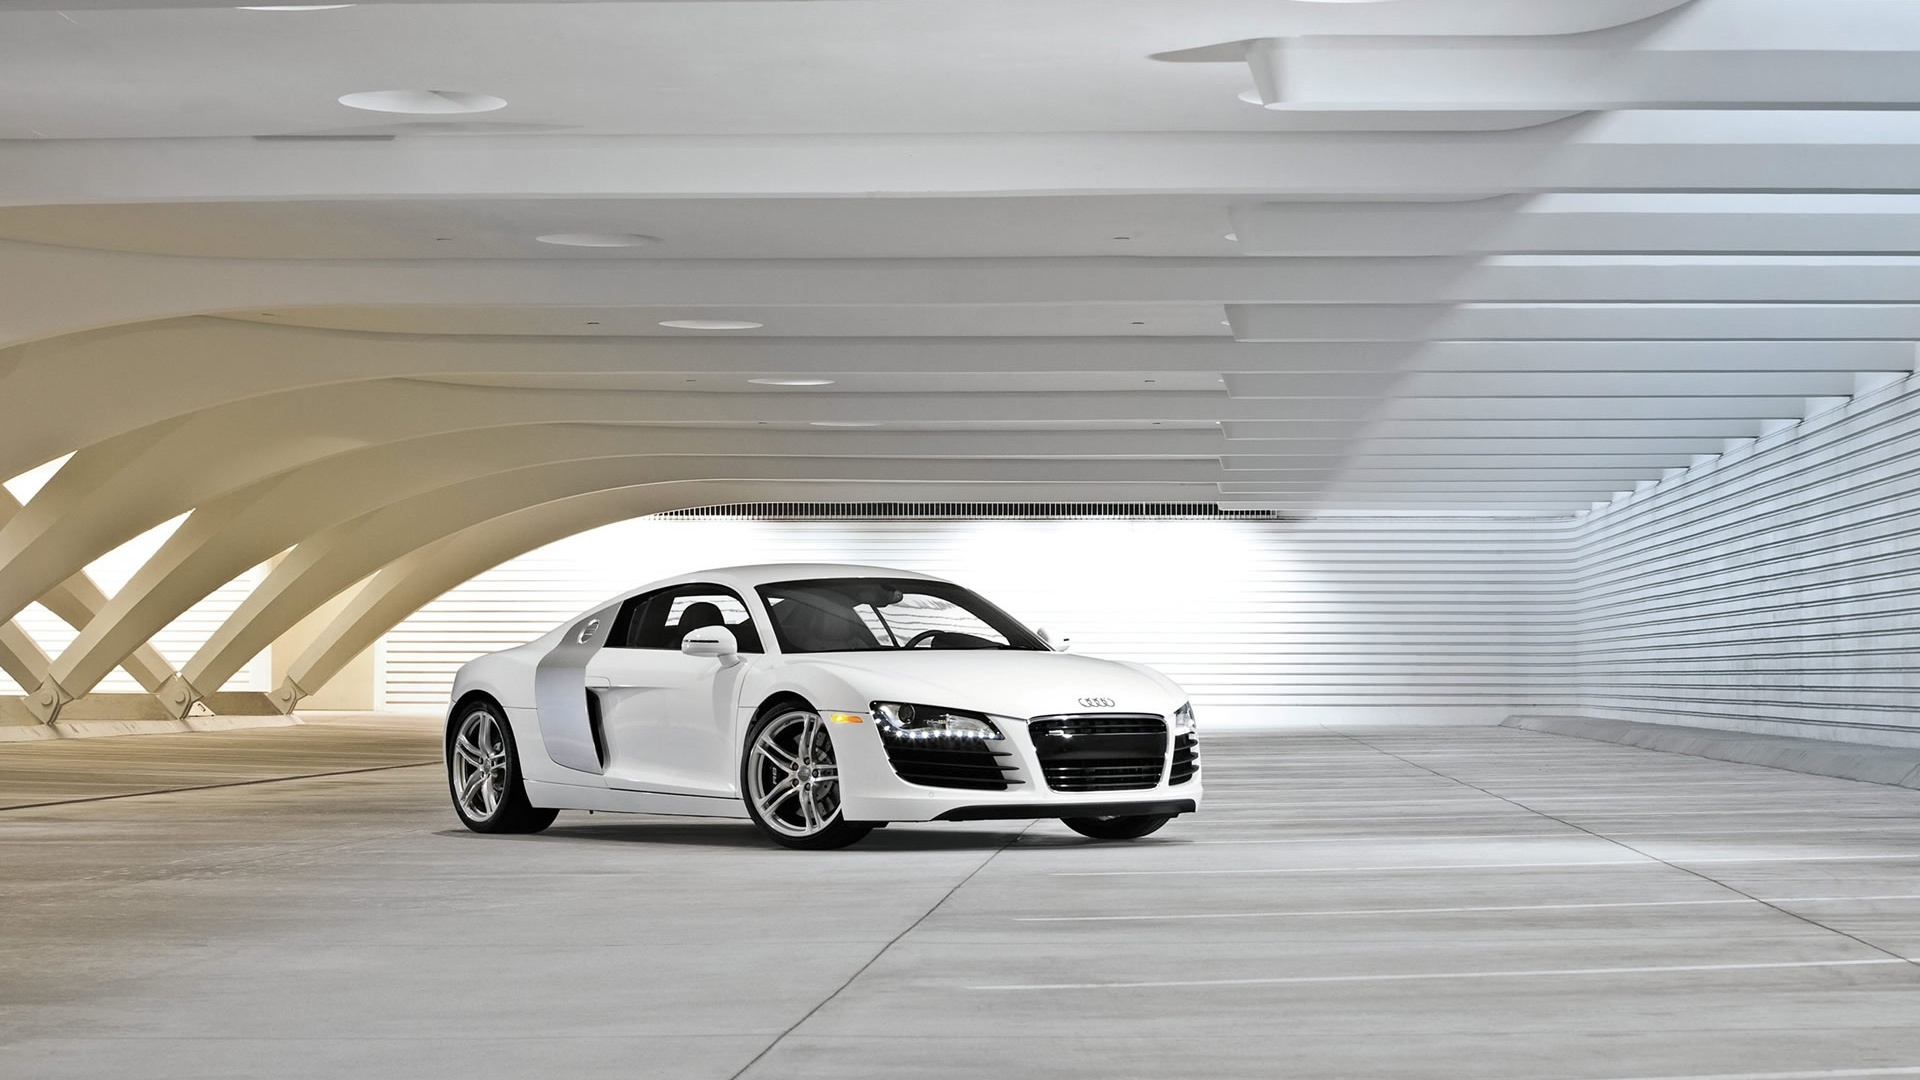 Audi R8 White front and side for 1920 x 1080 HDTV 1080p resolution